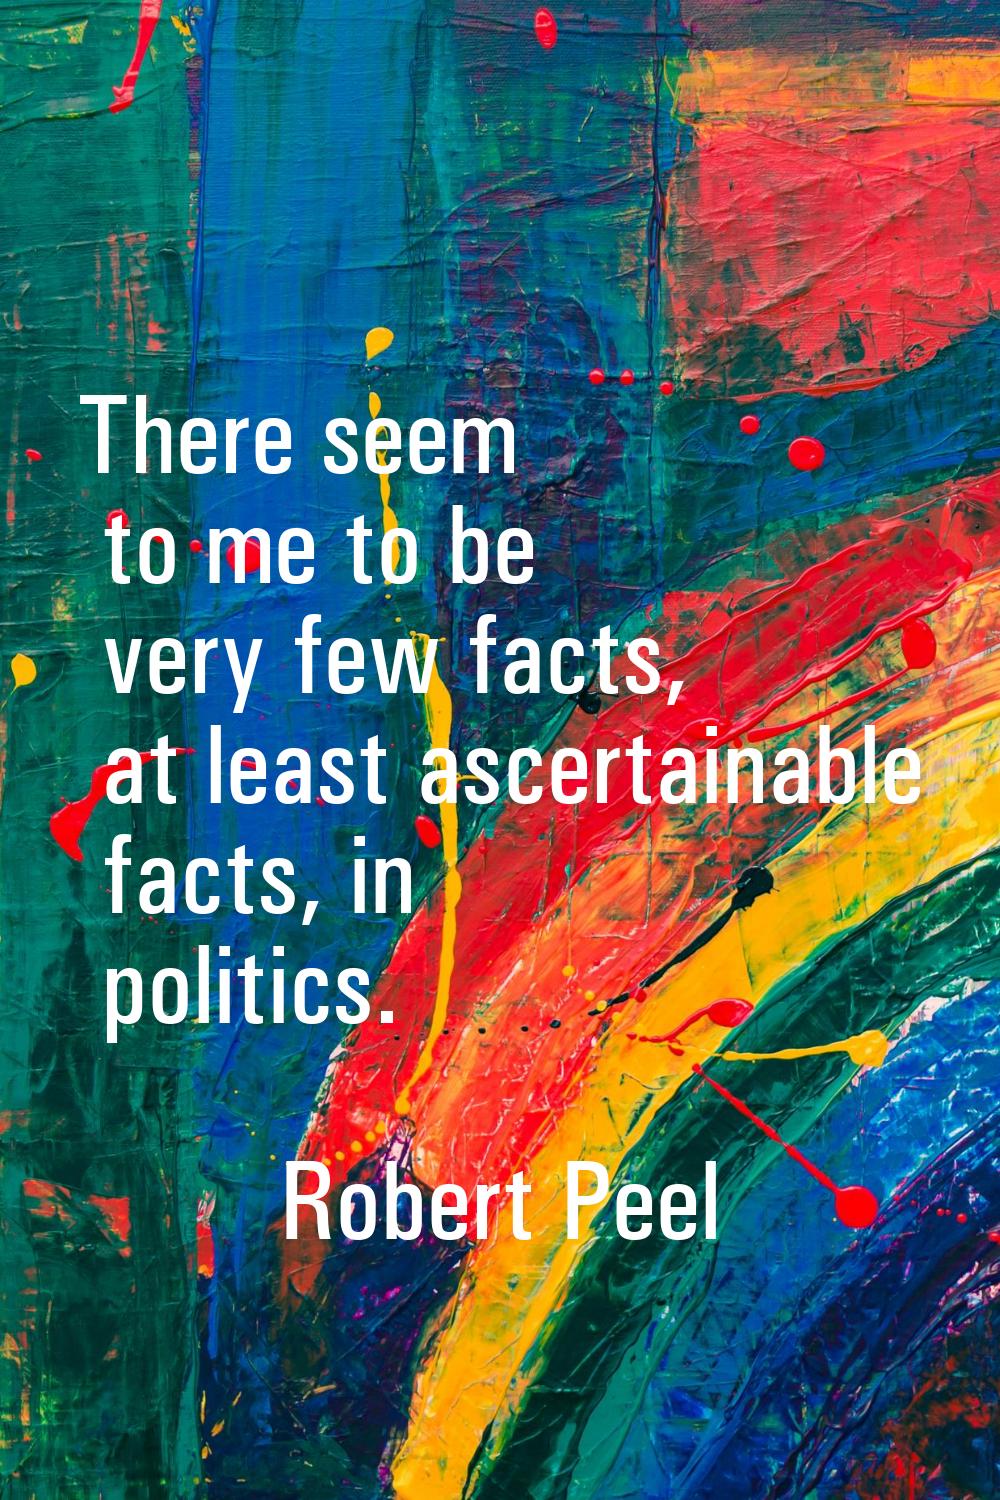 There seem to me to be very few facts, at least ascertainable facts, in politics.